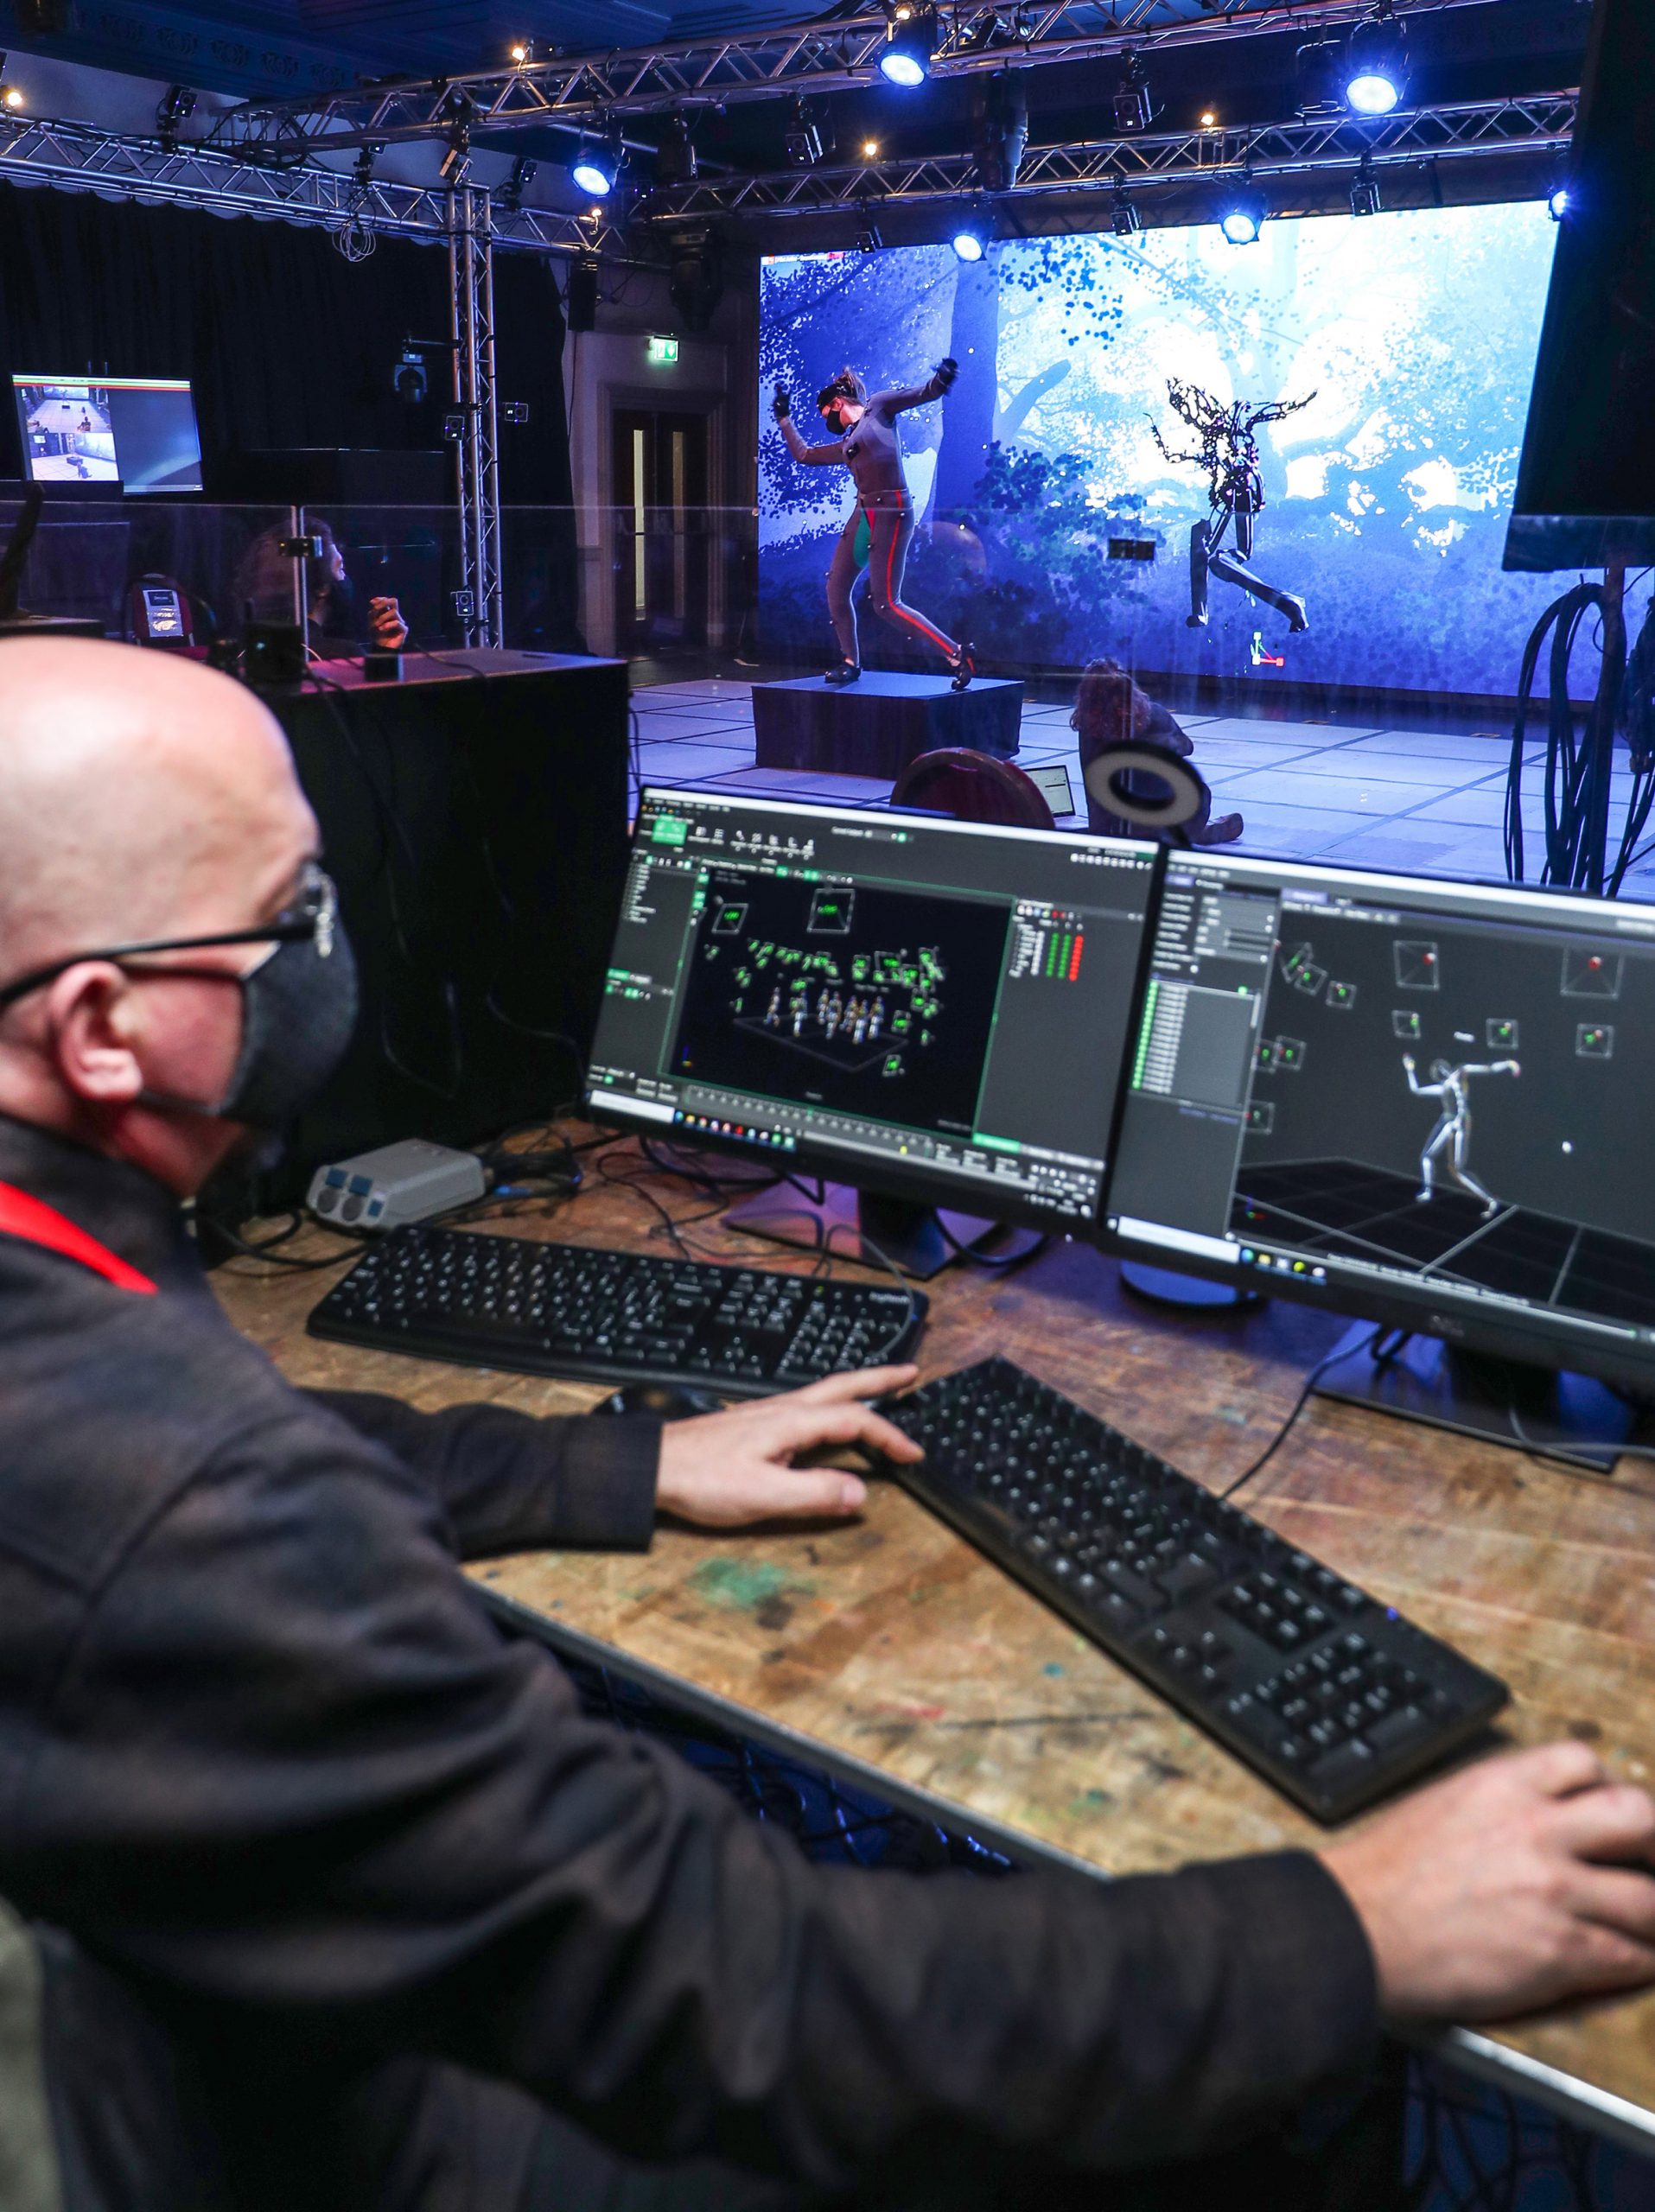 Behind the scenes of real-time animation for Dream play by the Royal Shakespeare company using Unreal Engine